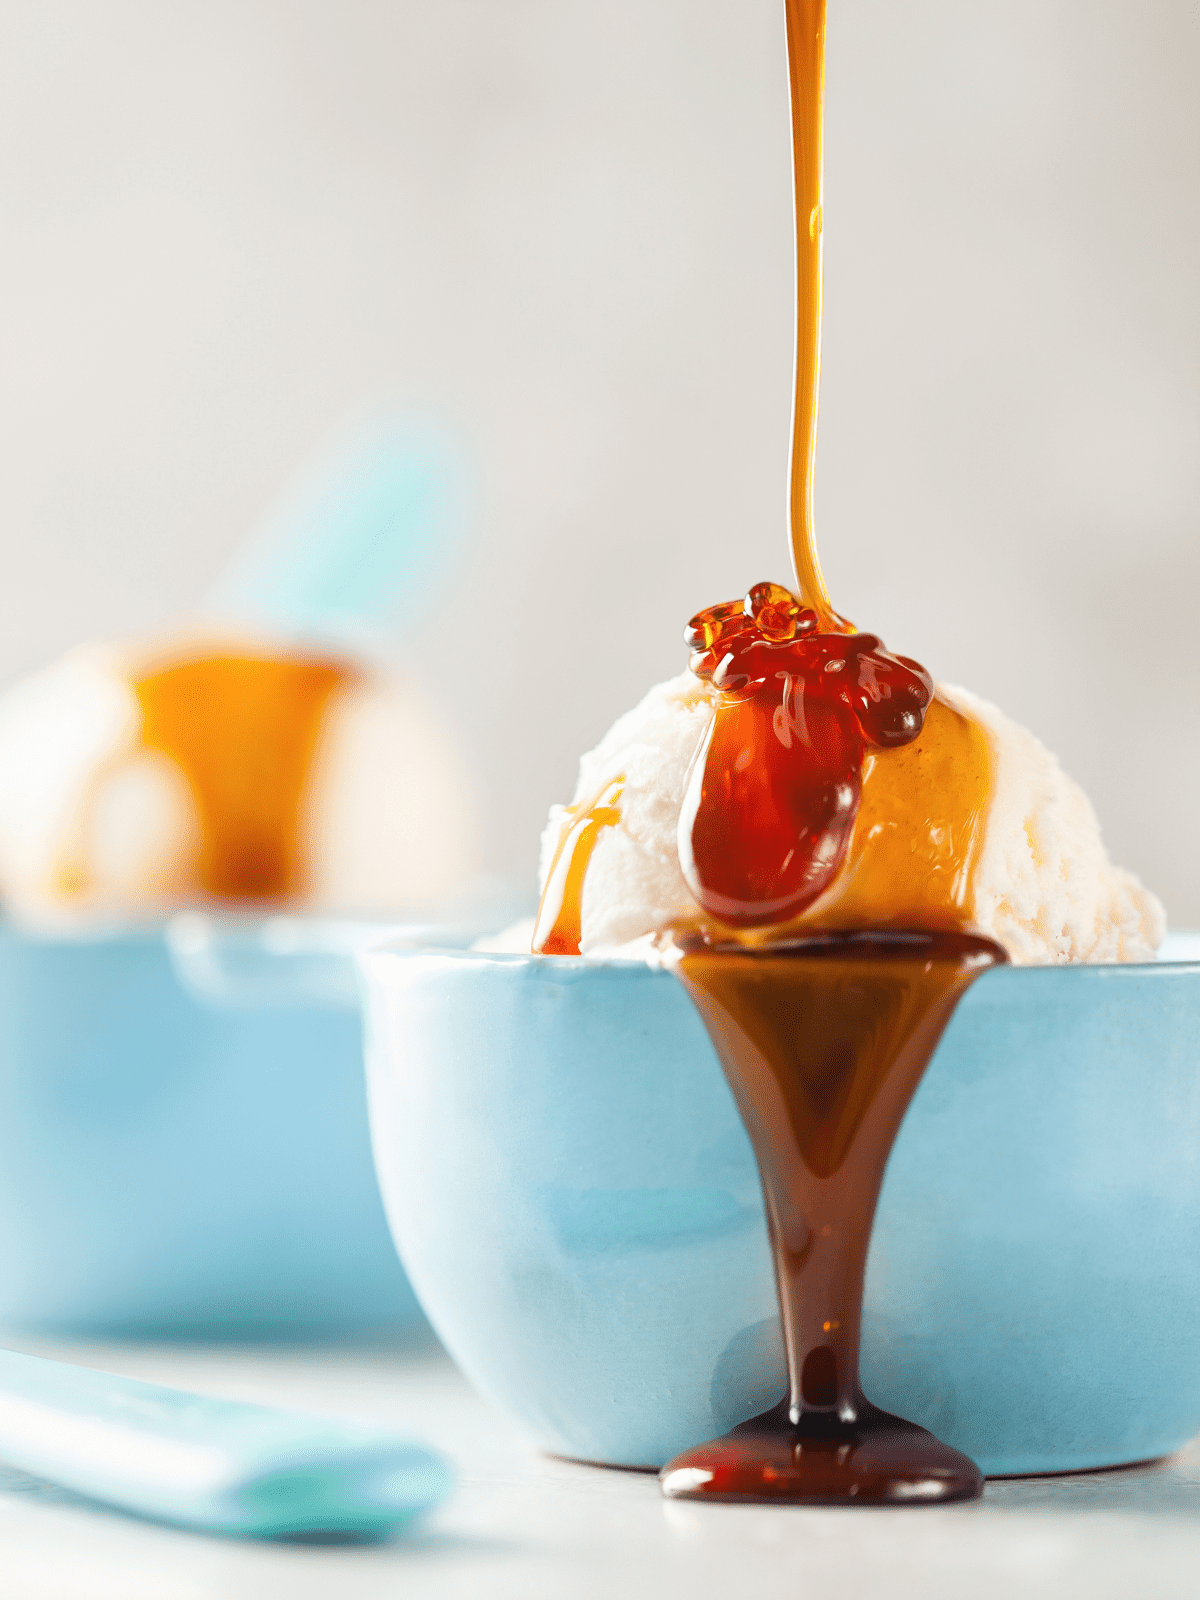 Blue bowls filled with vanilla ice cream and caramel sauce pouring down and over it.